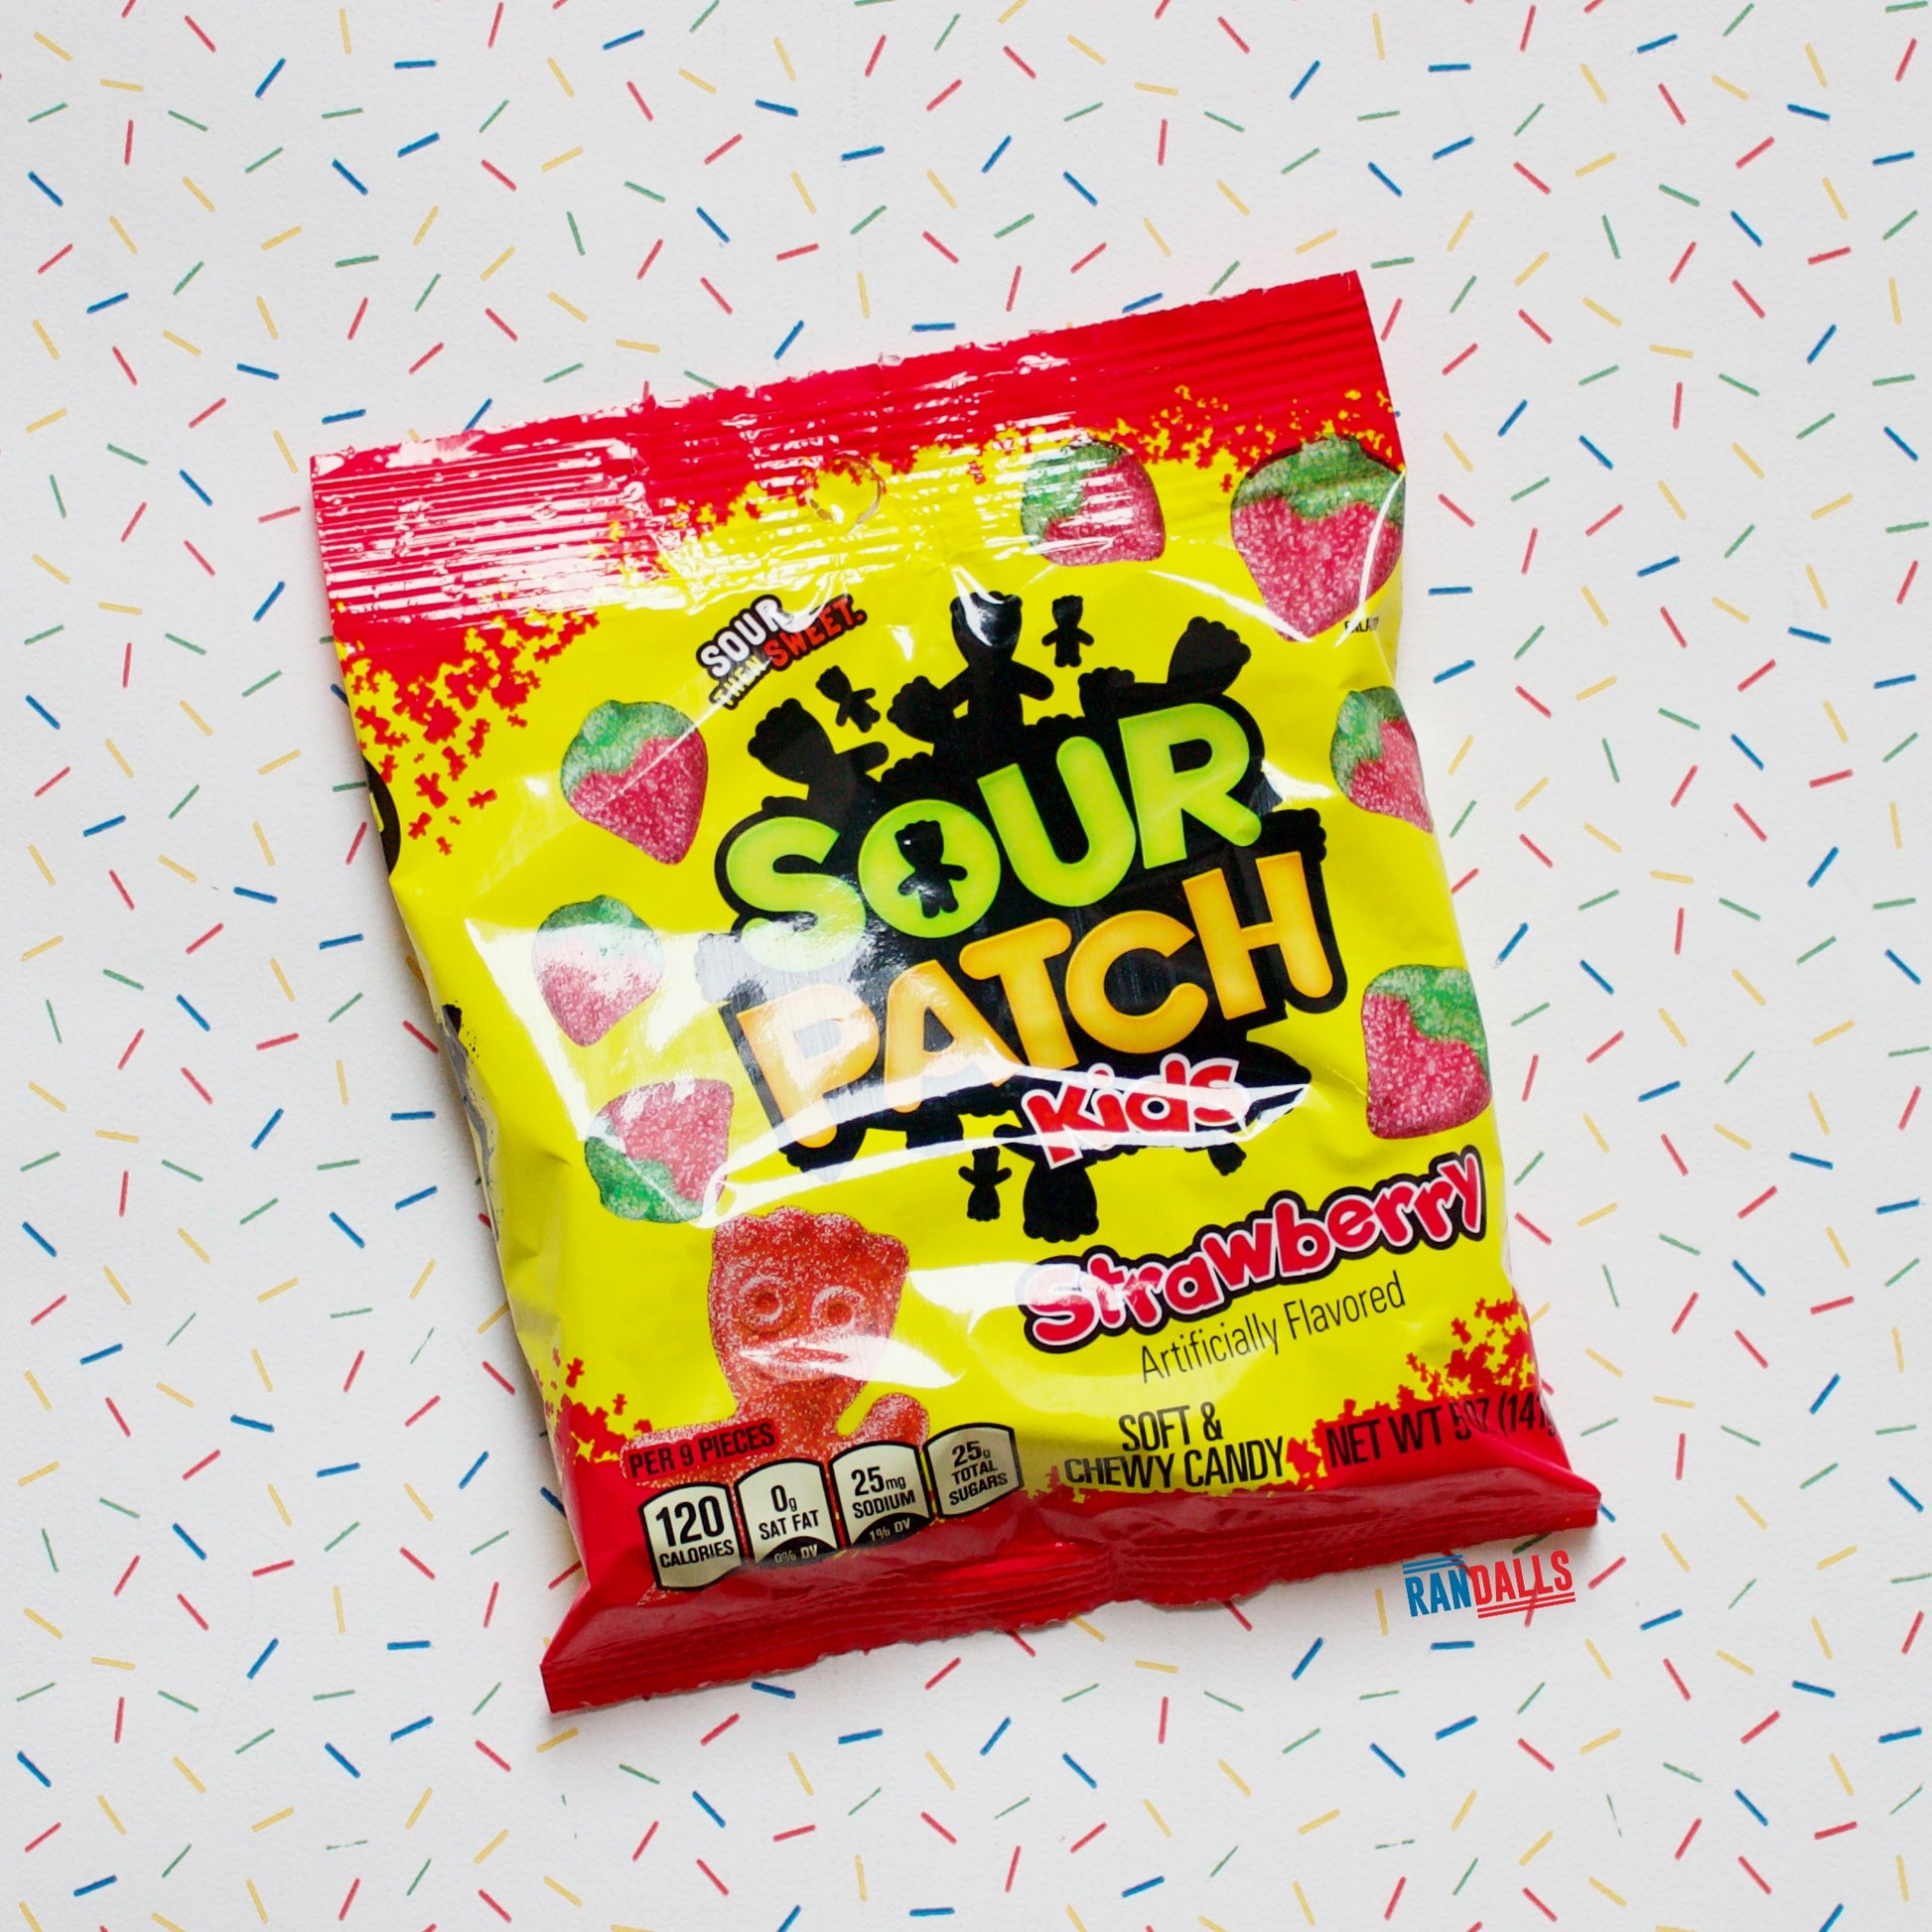 sour patch kids strawberry, gummy, sweets, candy, chewy, fizzy, sugared, fruit flavoured, usa, randalls